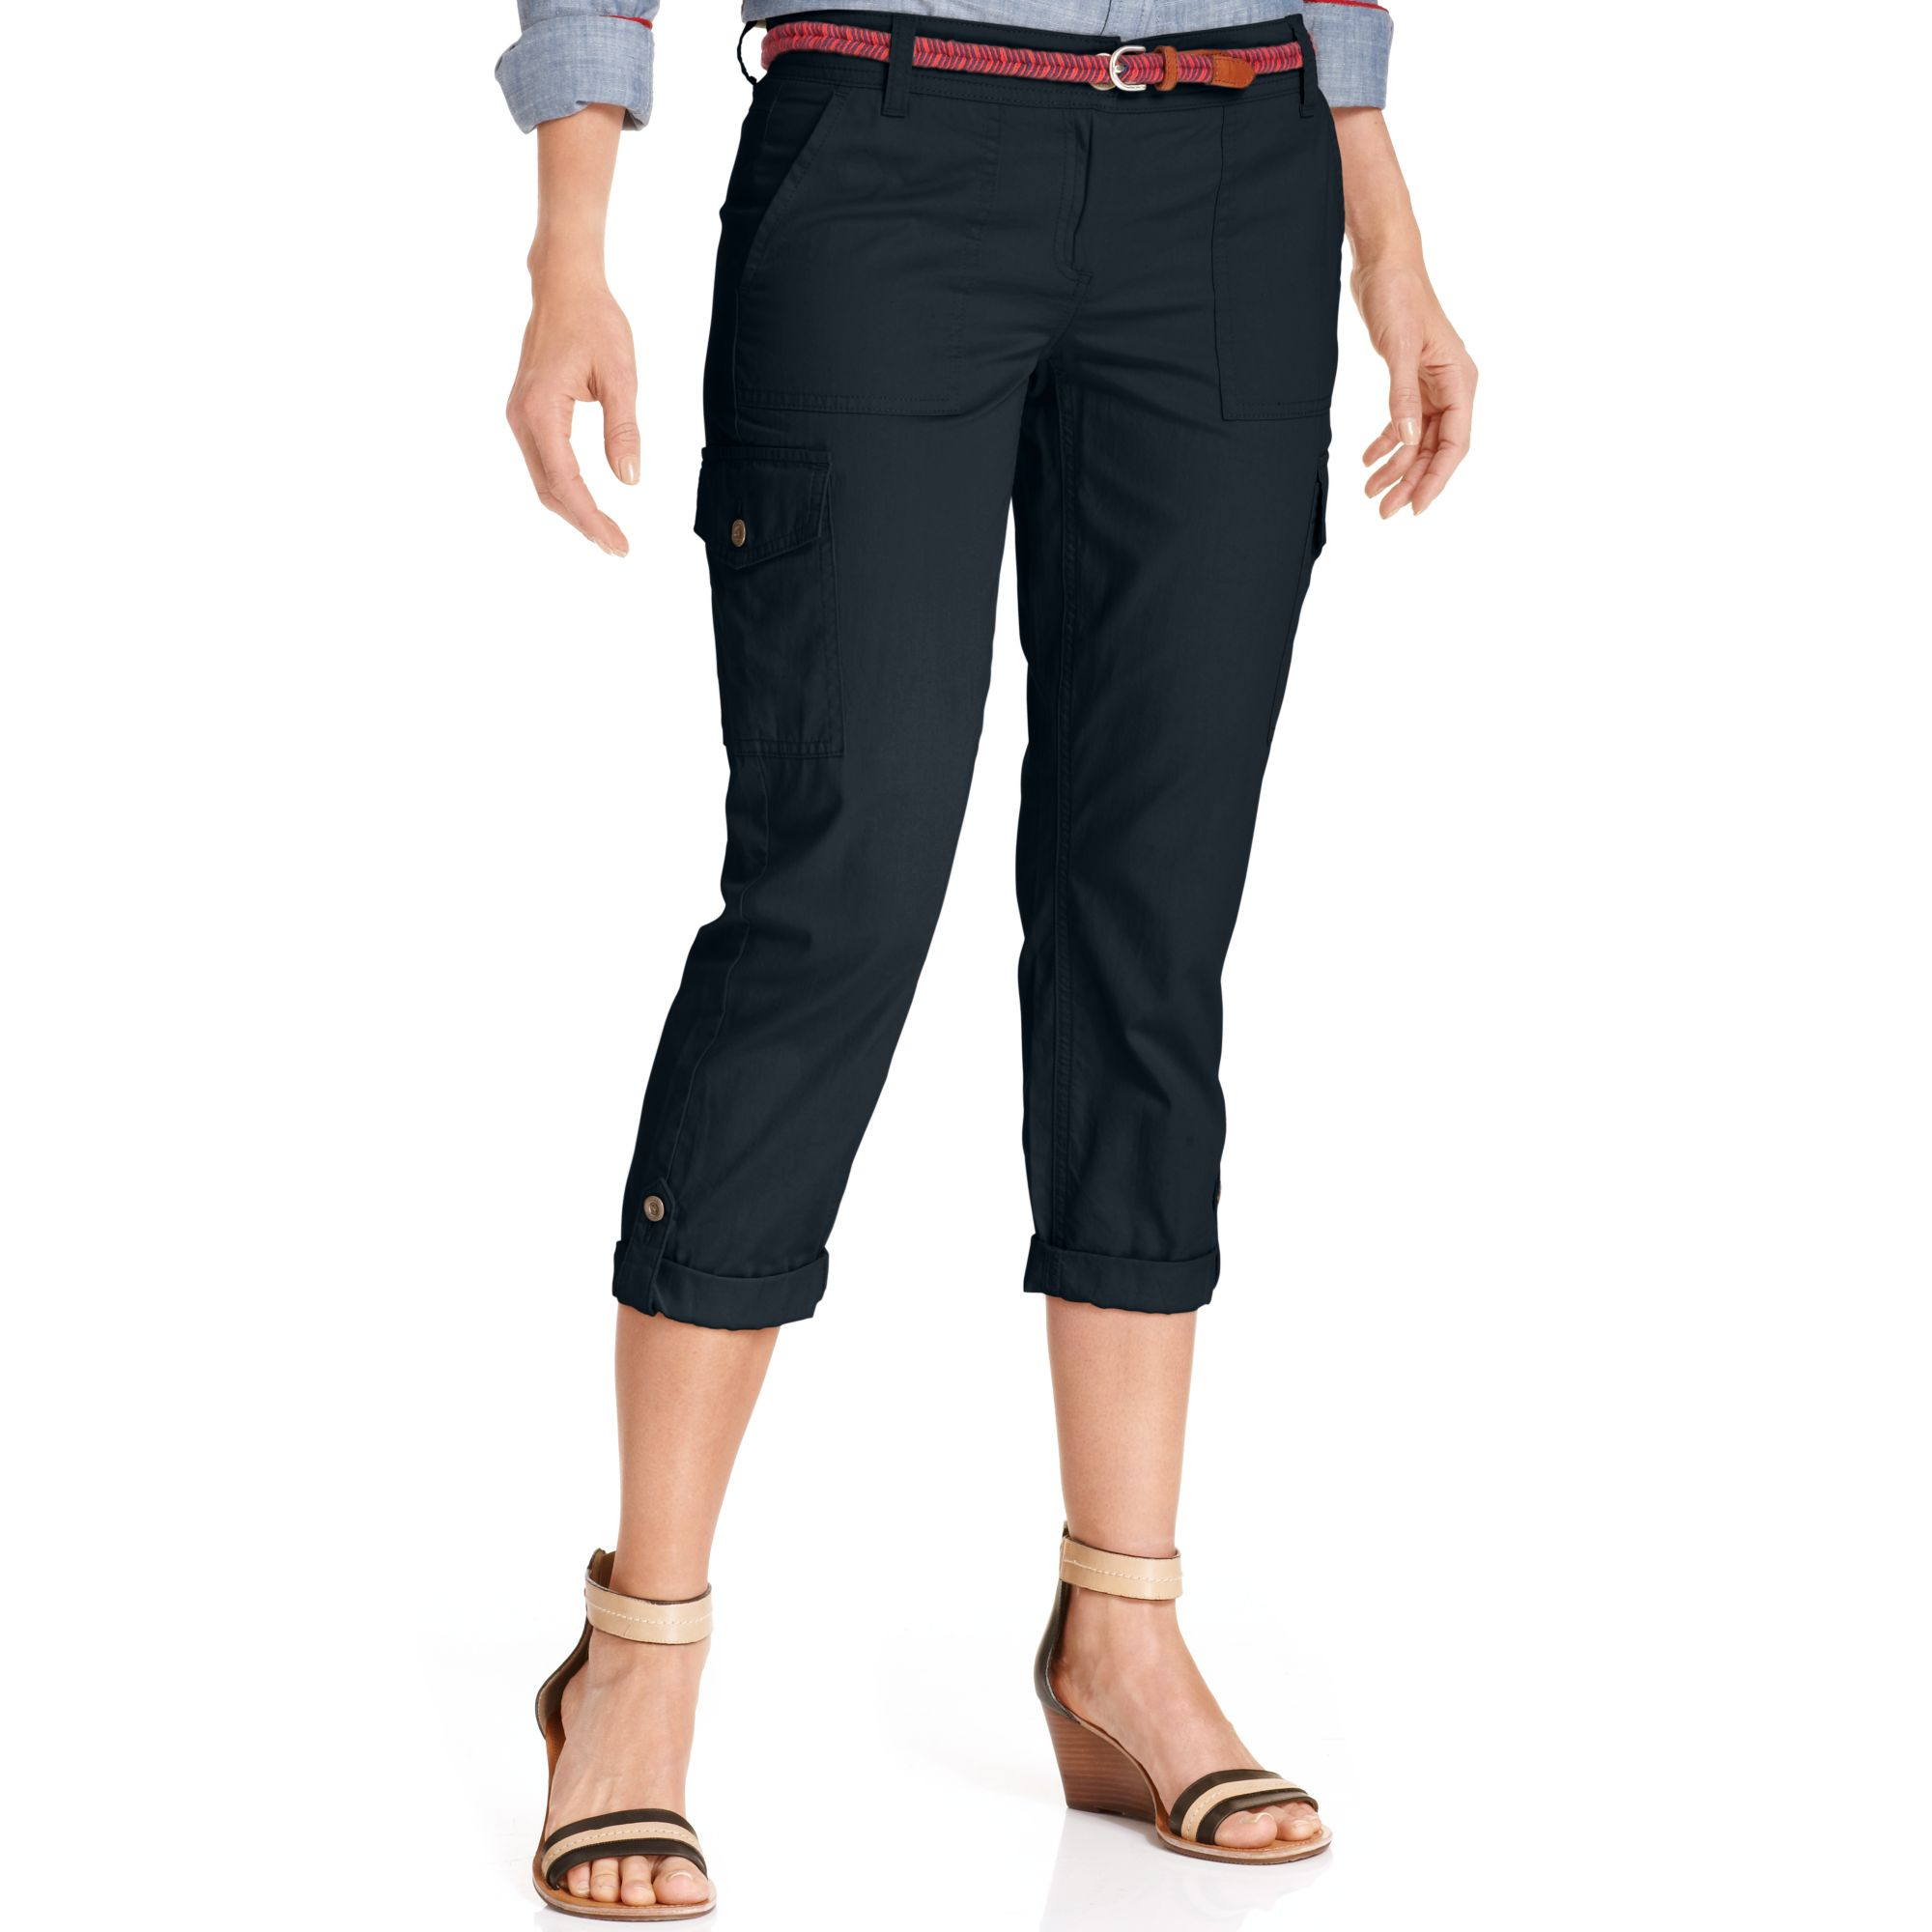 Lyst - Tommy hilfiger Cropped Cargo Pants in Blue